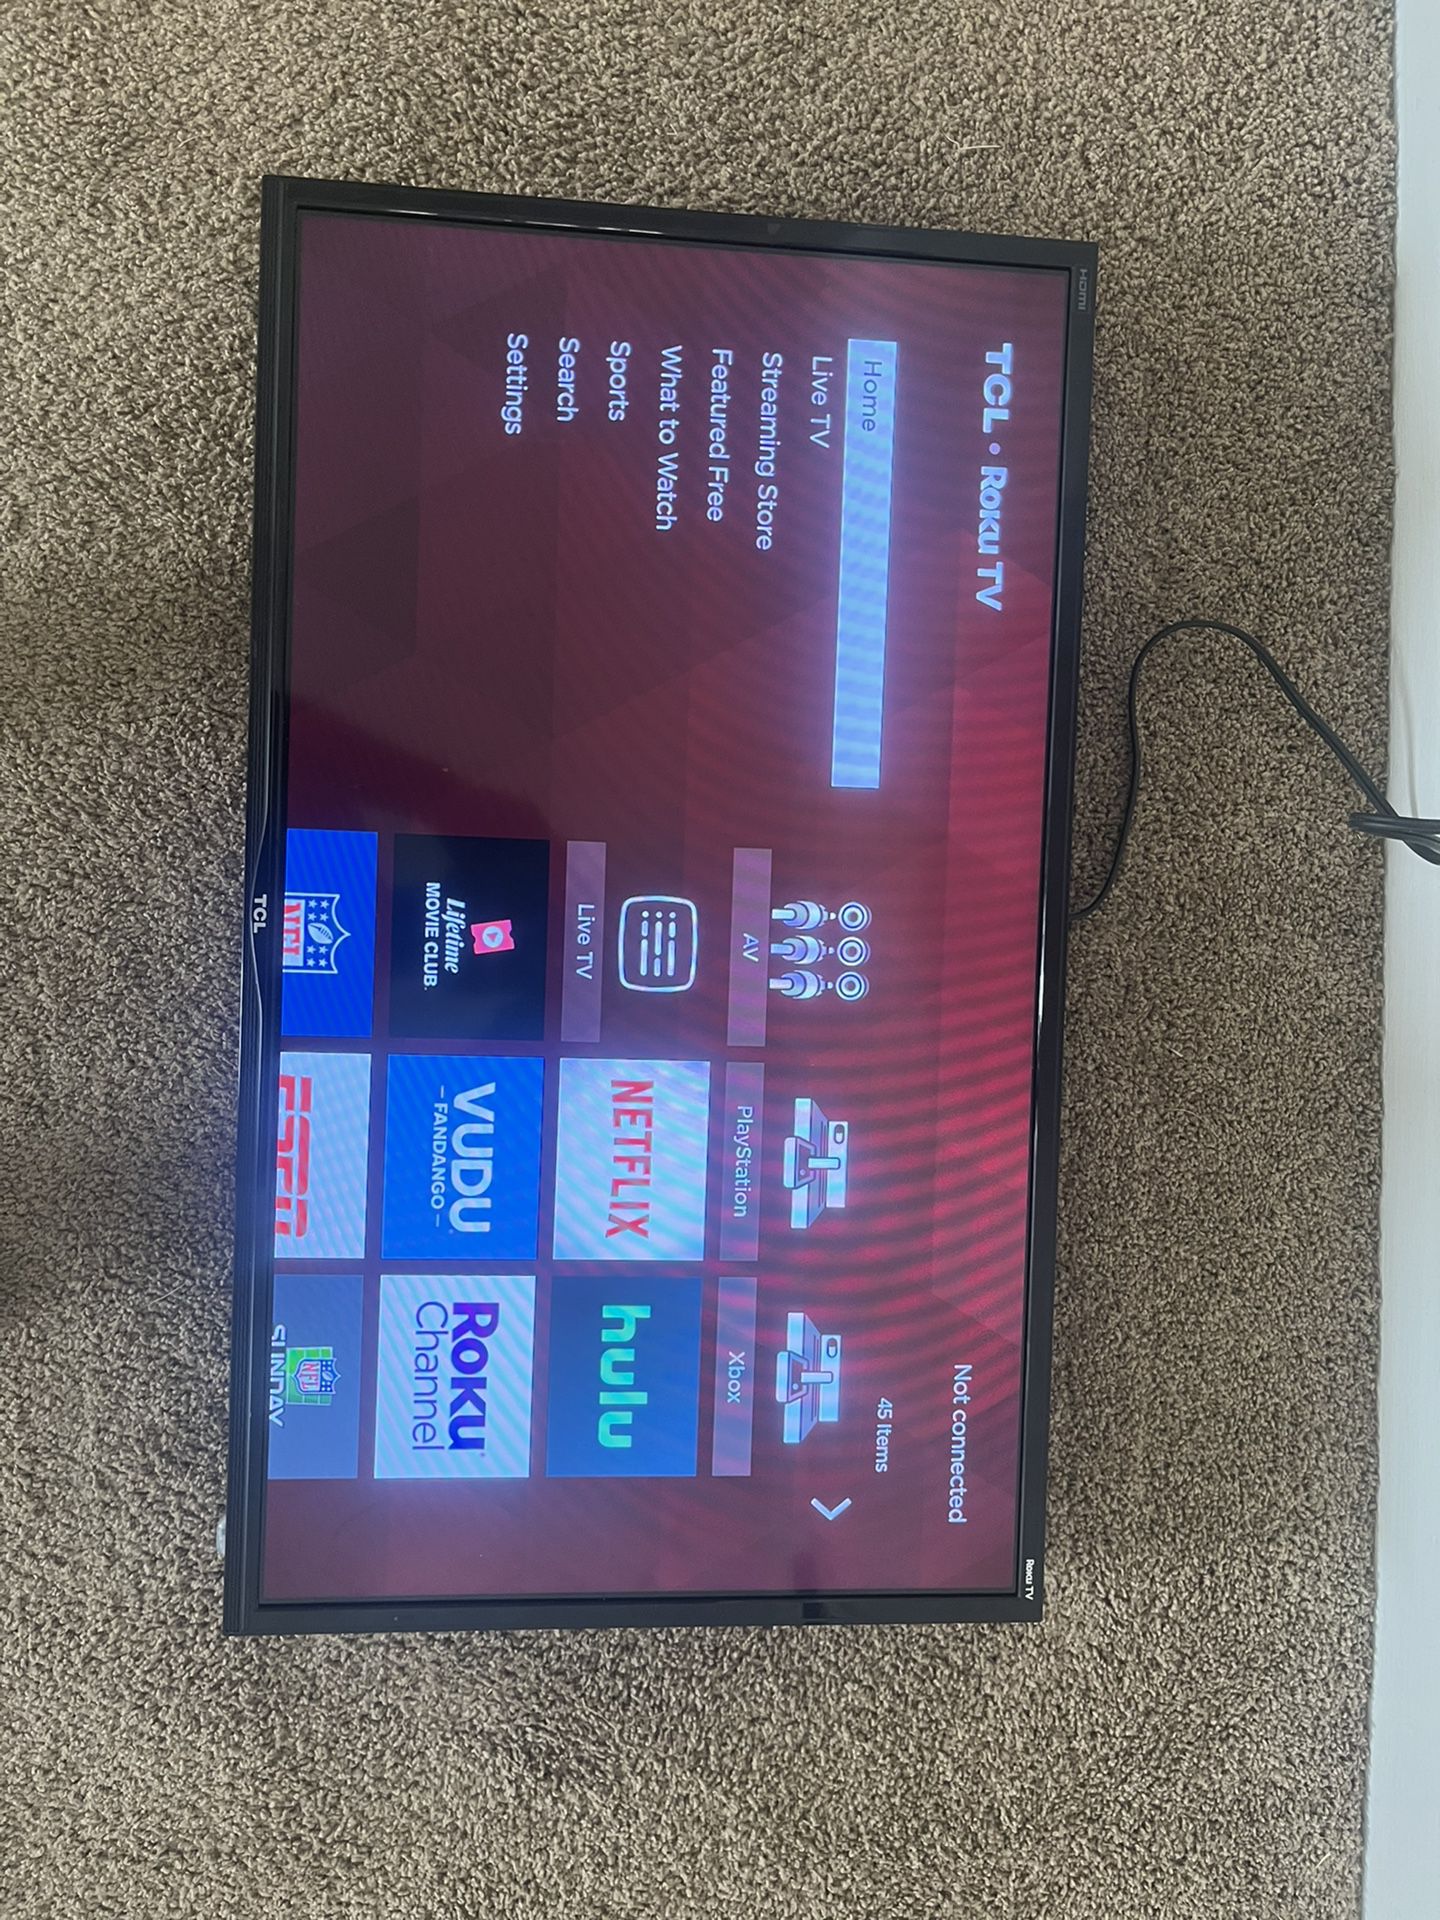 TCL Roku Smart Tv 32 Inches